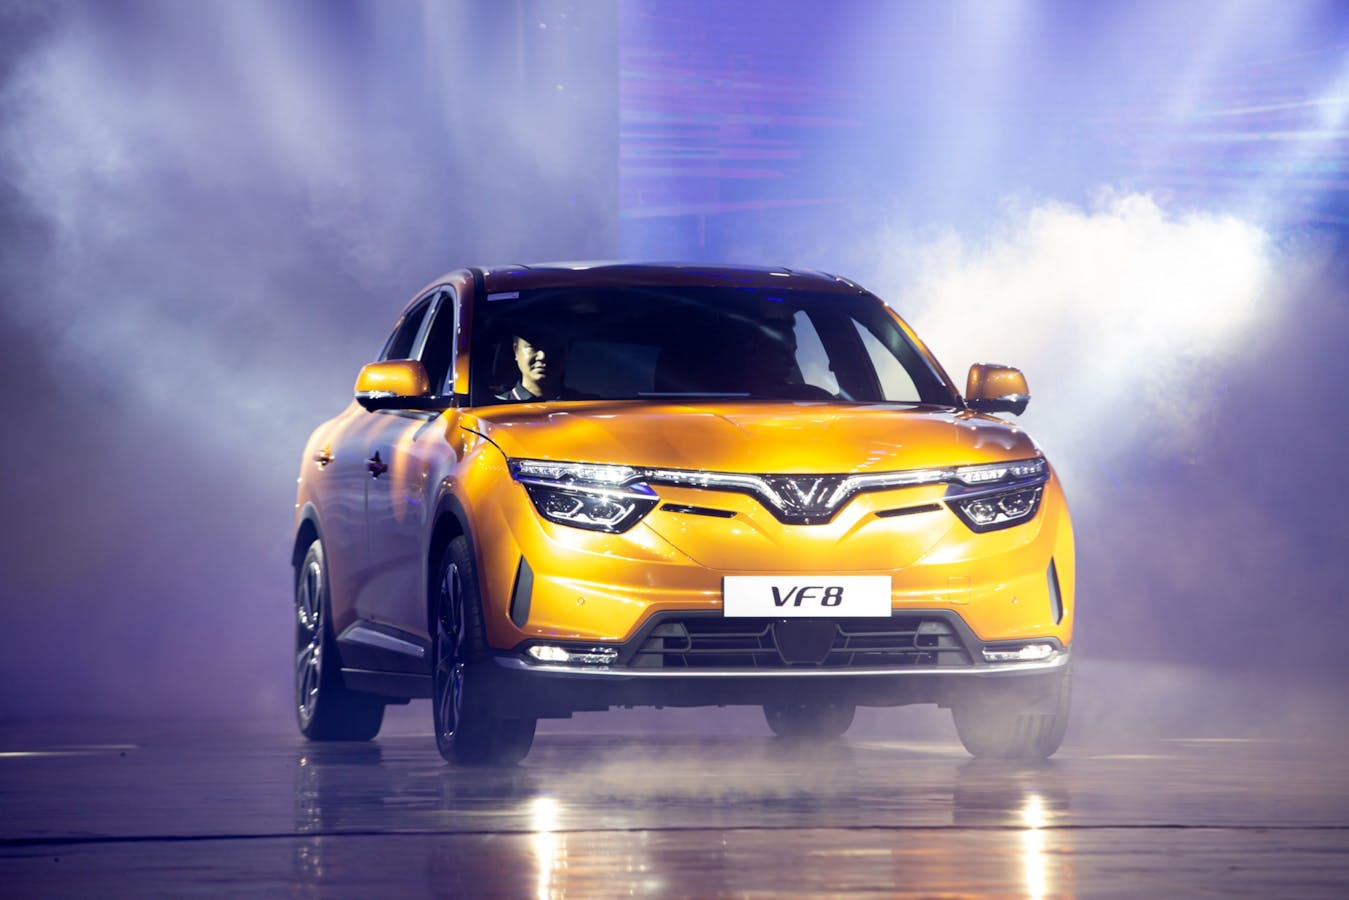 On Saturday in Haiphong, Vietnam, VinFast unveiled the first electric vehicles it will deliver to the U.S. and Europe in the coming weeks. Photo: Yen Duong/Bloomberg